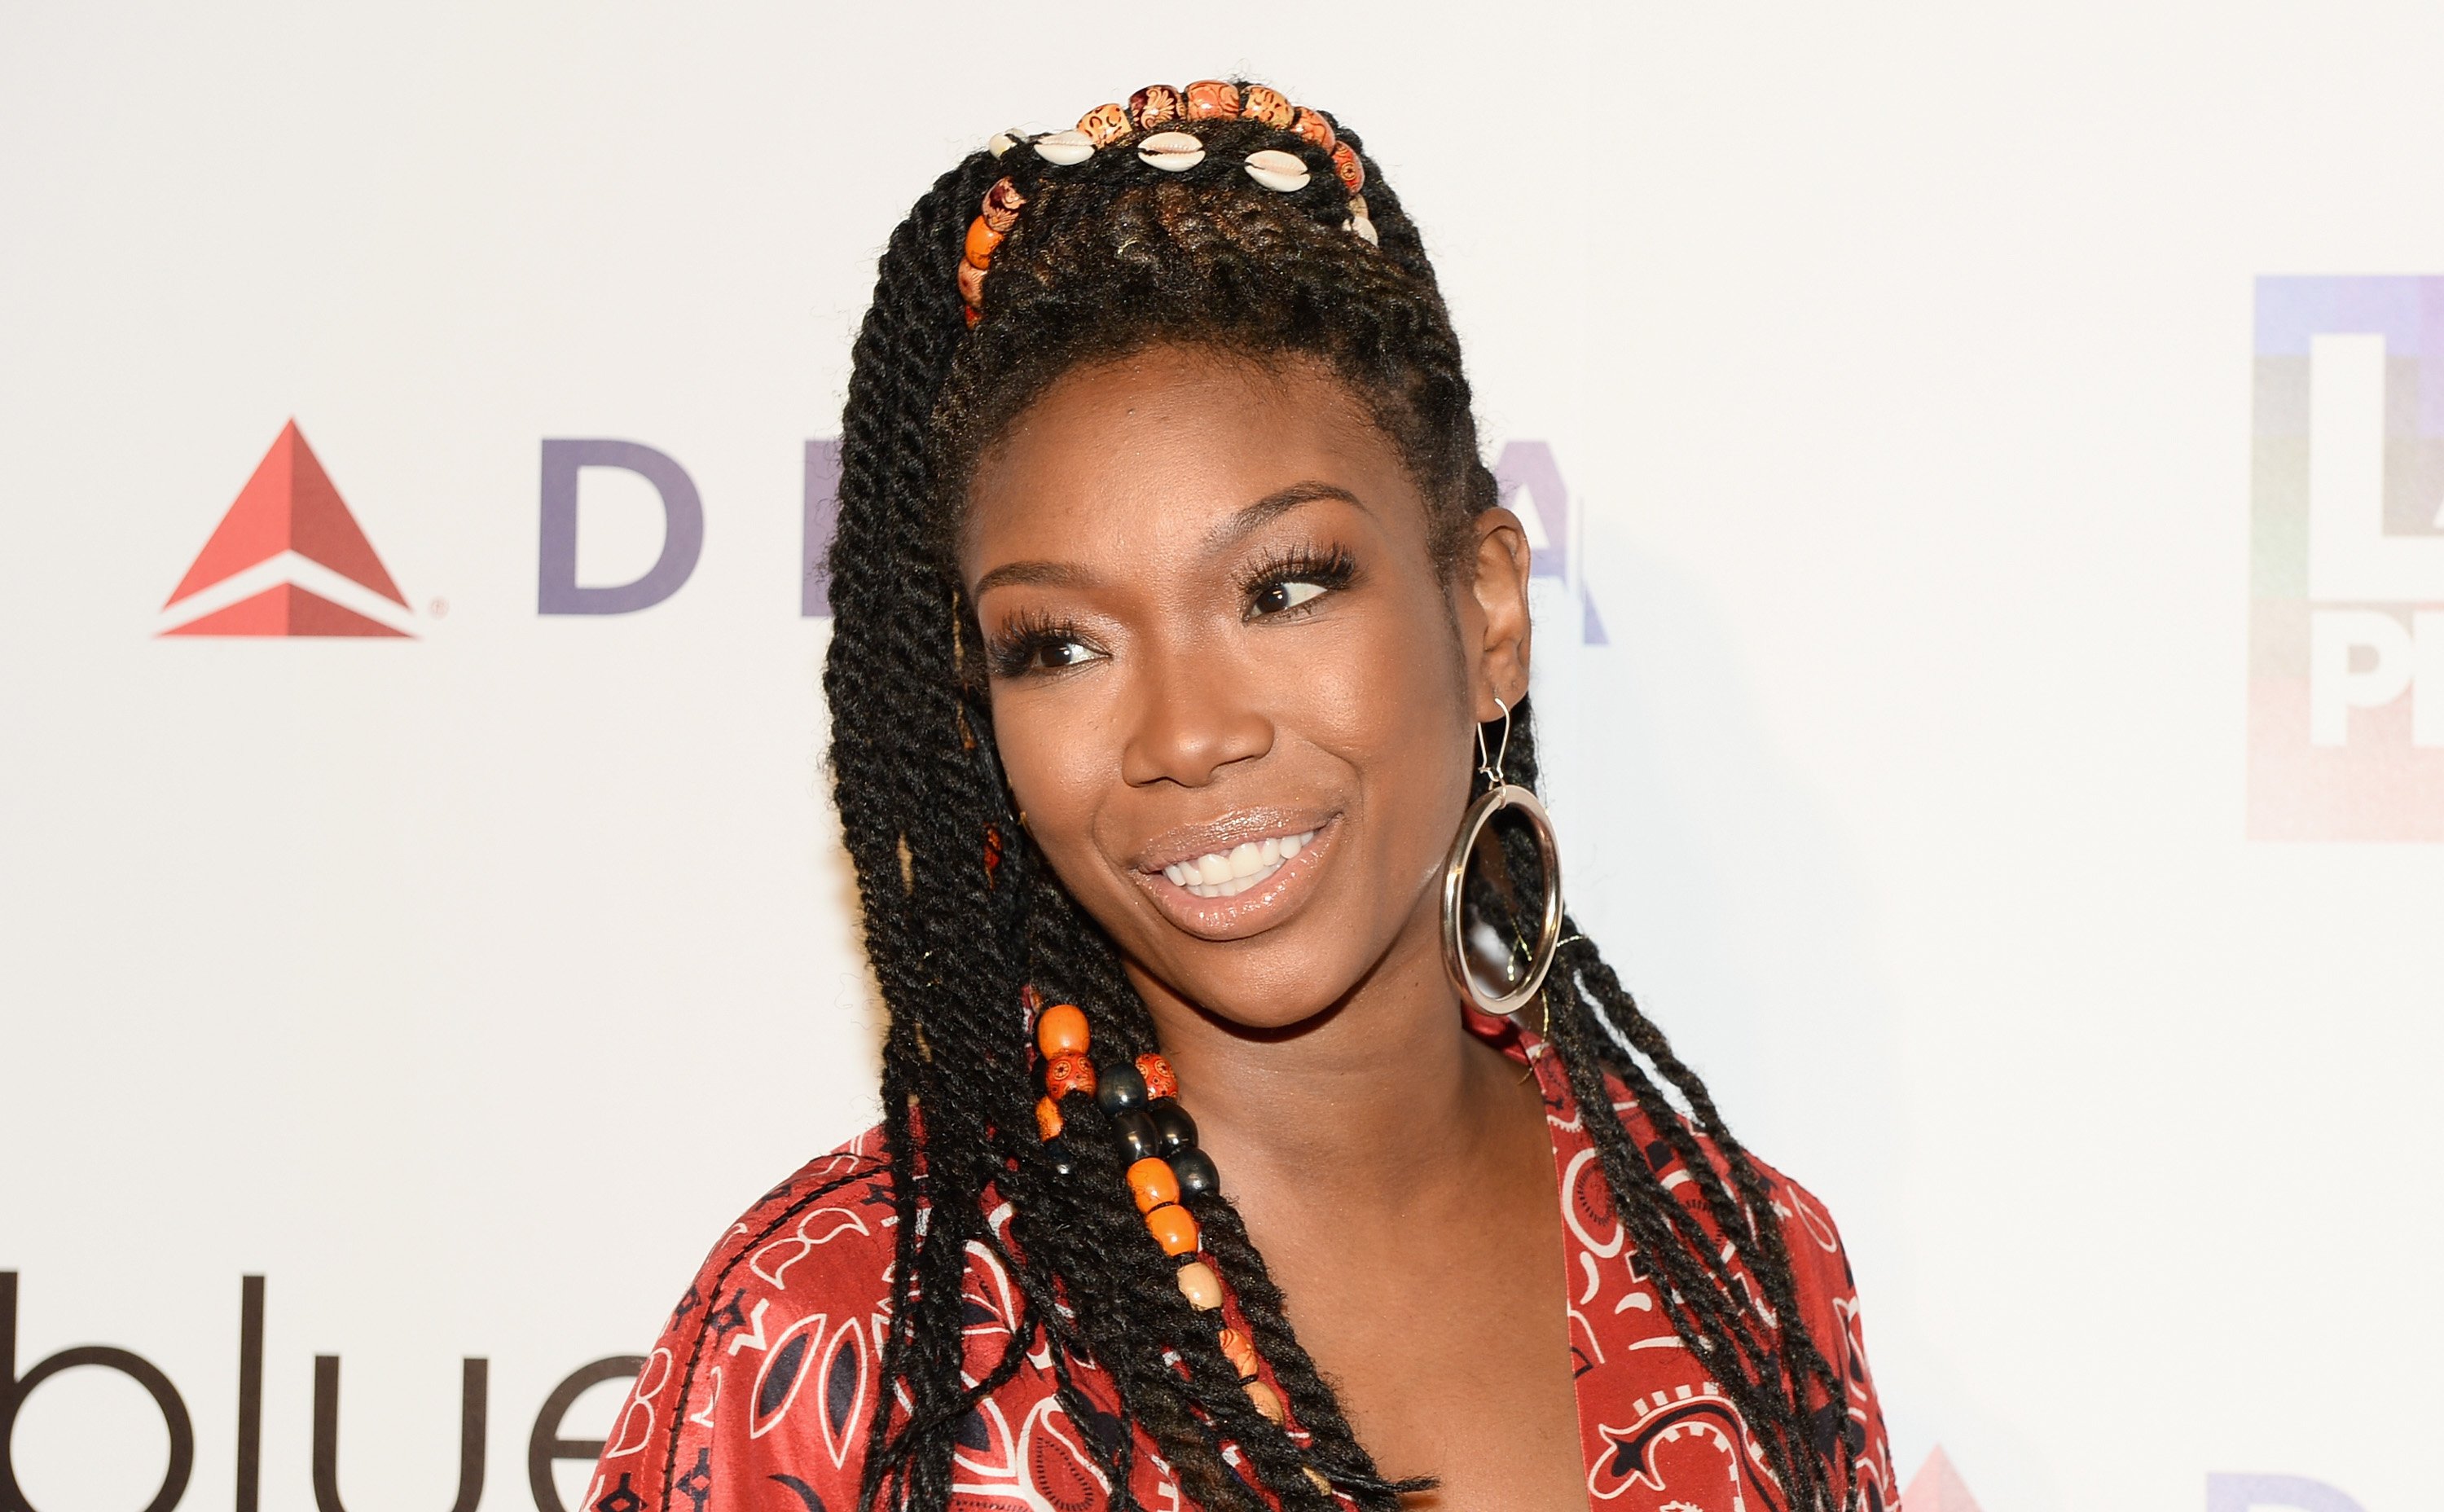 Brandy Norwood at the LA Pride Music Festival and Parade 2017 on June 11, 2017. | Photo: Getty Images